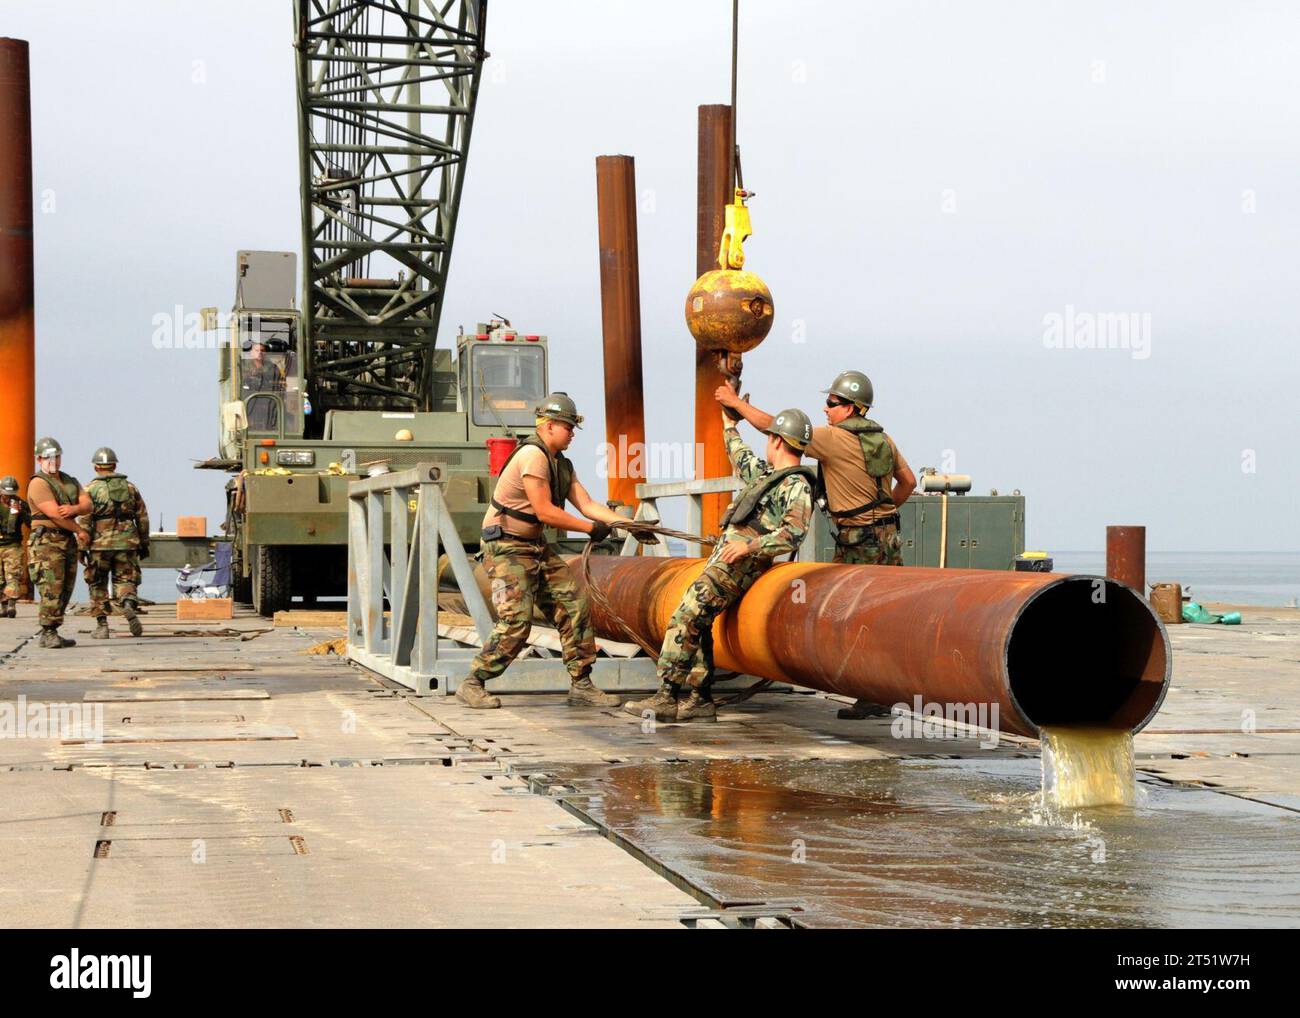 0807311424C-336 CAMP PENDLETON, Calif. (July 31, 2008) Seabees assigned to Amphibious Construction Battalion (ACB) 1 and Amphibious Construction Battalion (ACB) 2 unhook crane cables from the pile as ocean water flows out onto the deck of the elevated causeway system (ELCAS) as the ELCAS pier deconstruction continues during Joint Logistics Over-The-Shore 2008. Navy Stock Photo